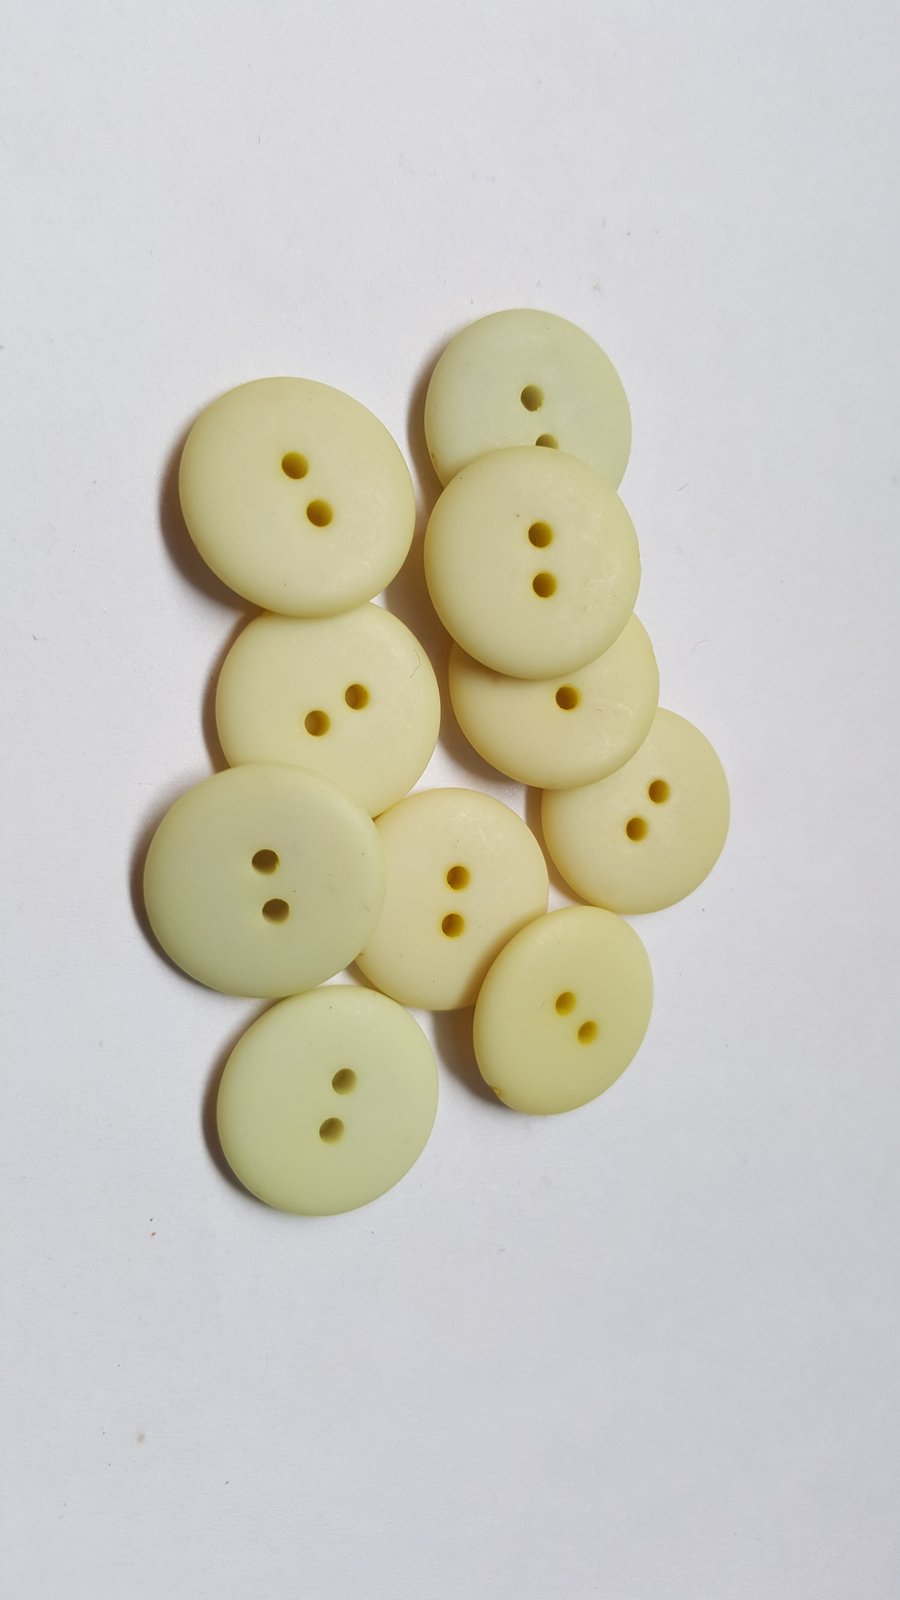 10 x 2-Hole Resin Buttons - Matte - Round - 18mm - Pale Yellow 